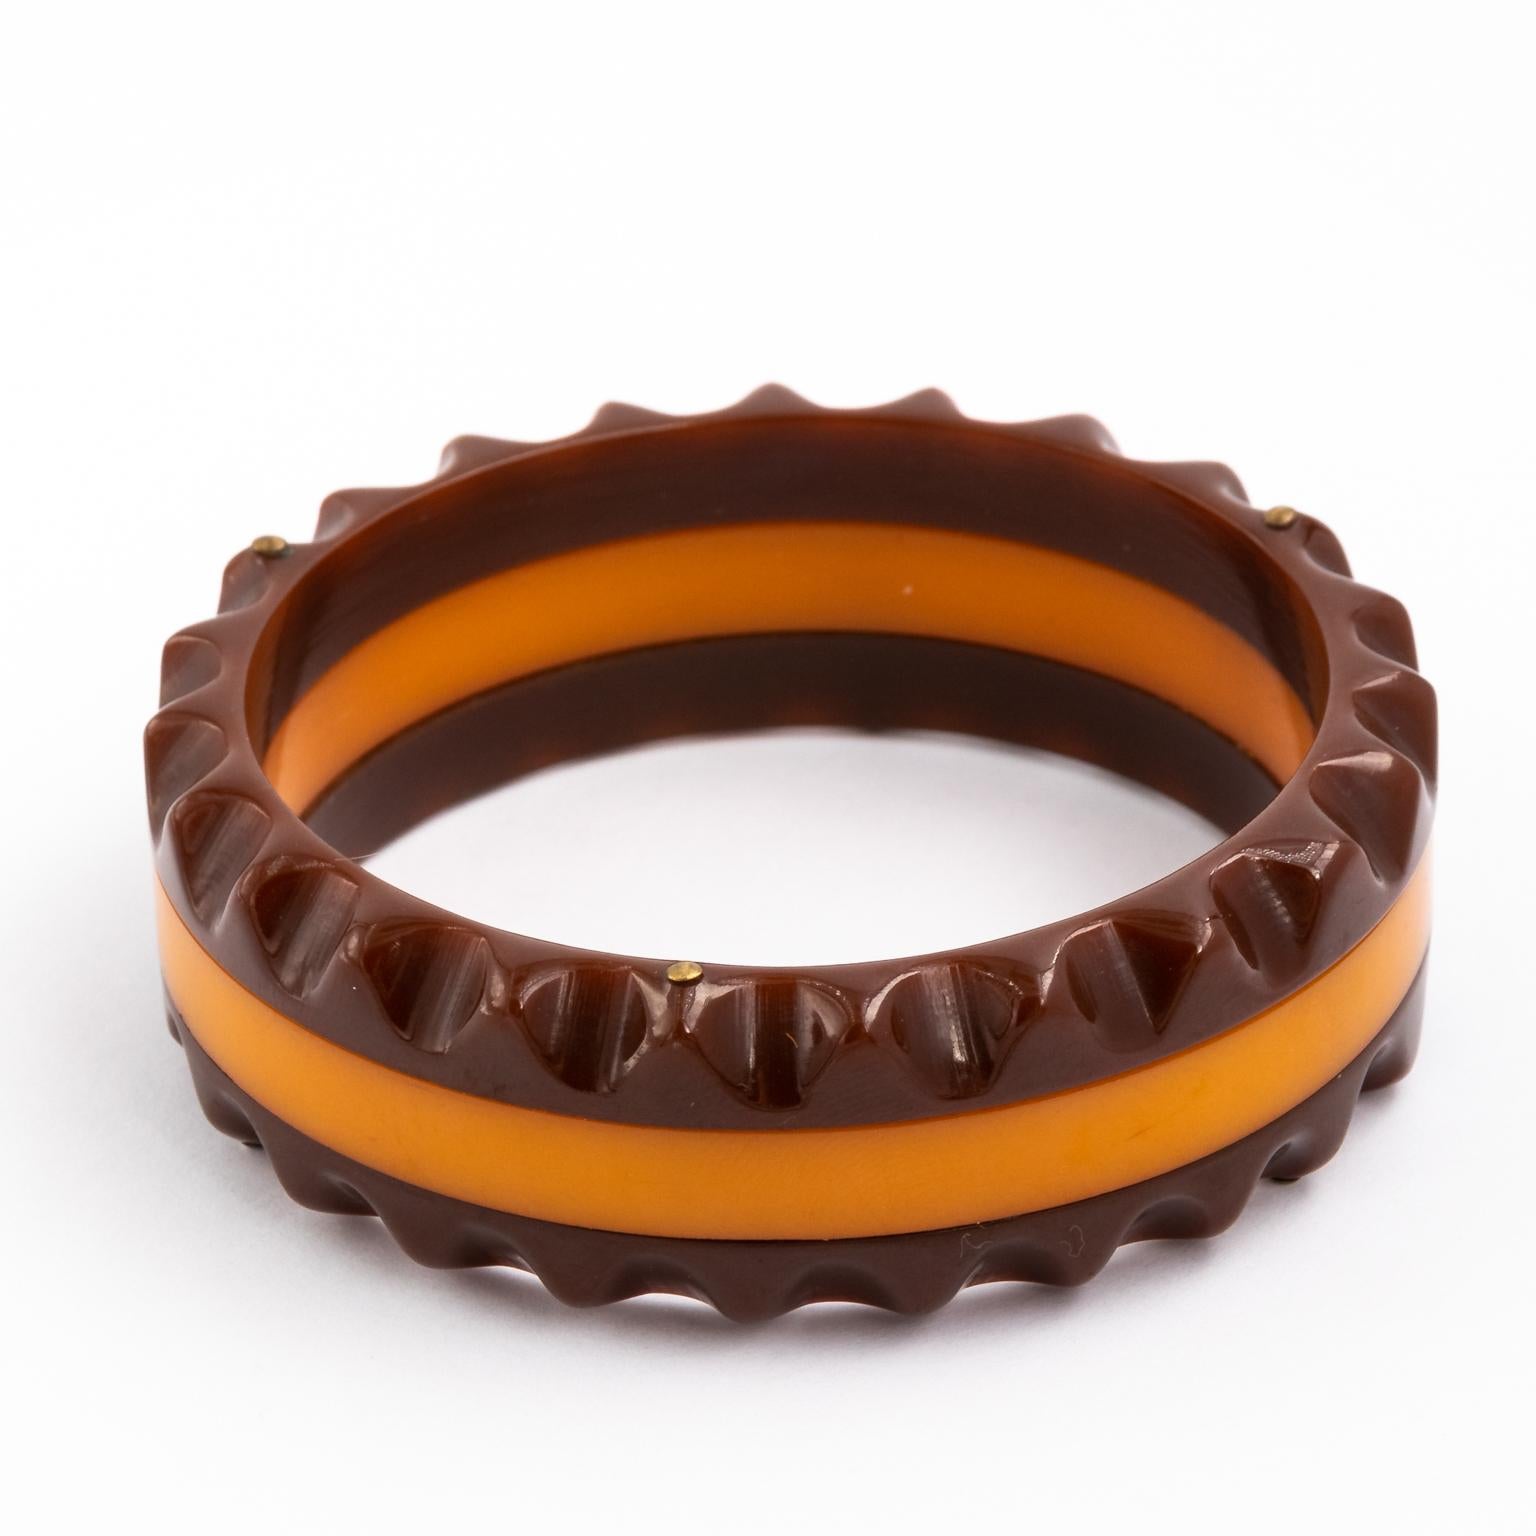 Art Deco Butterscotch Maroon Bakelite Bracelet   In Excellent Condition For Sale In Stamford, CT